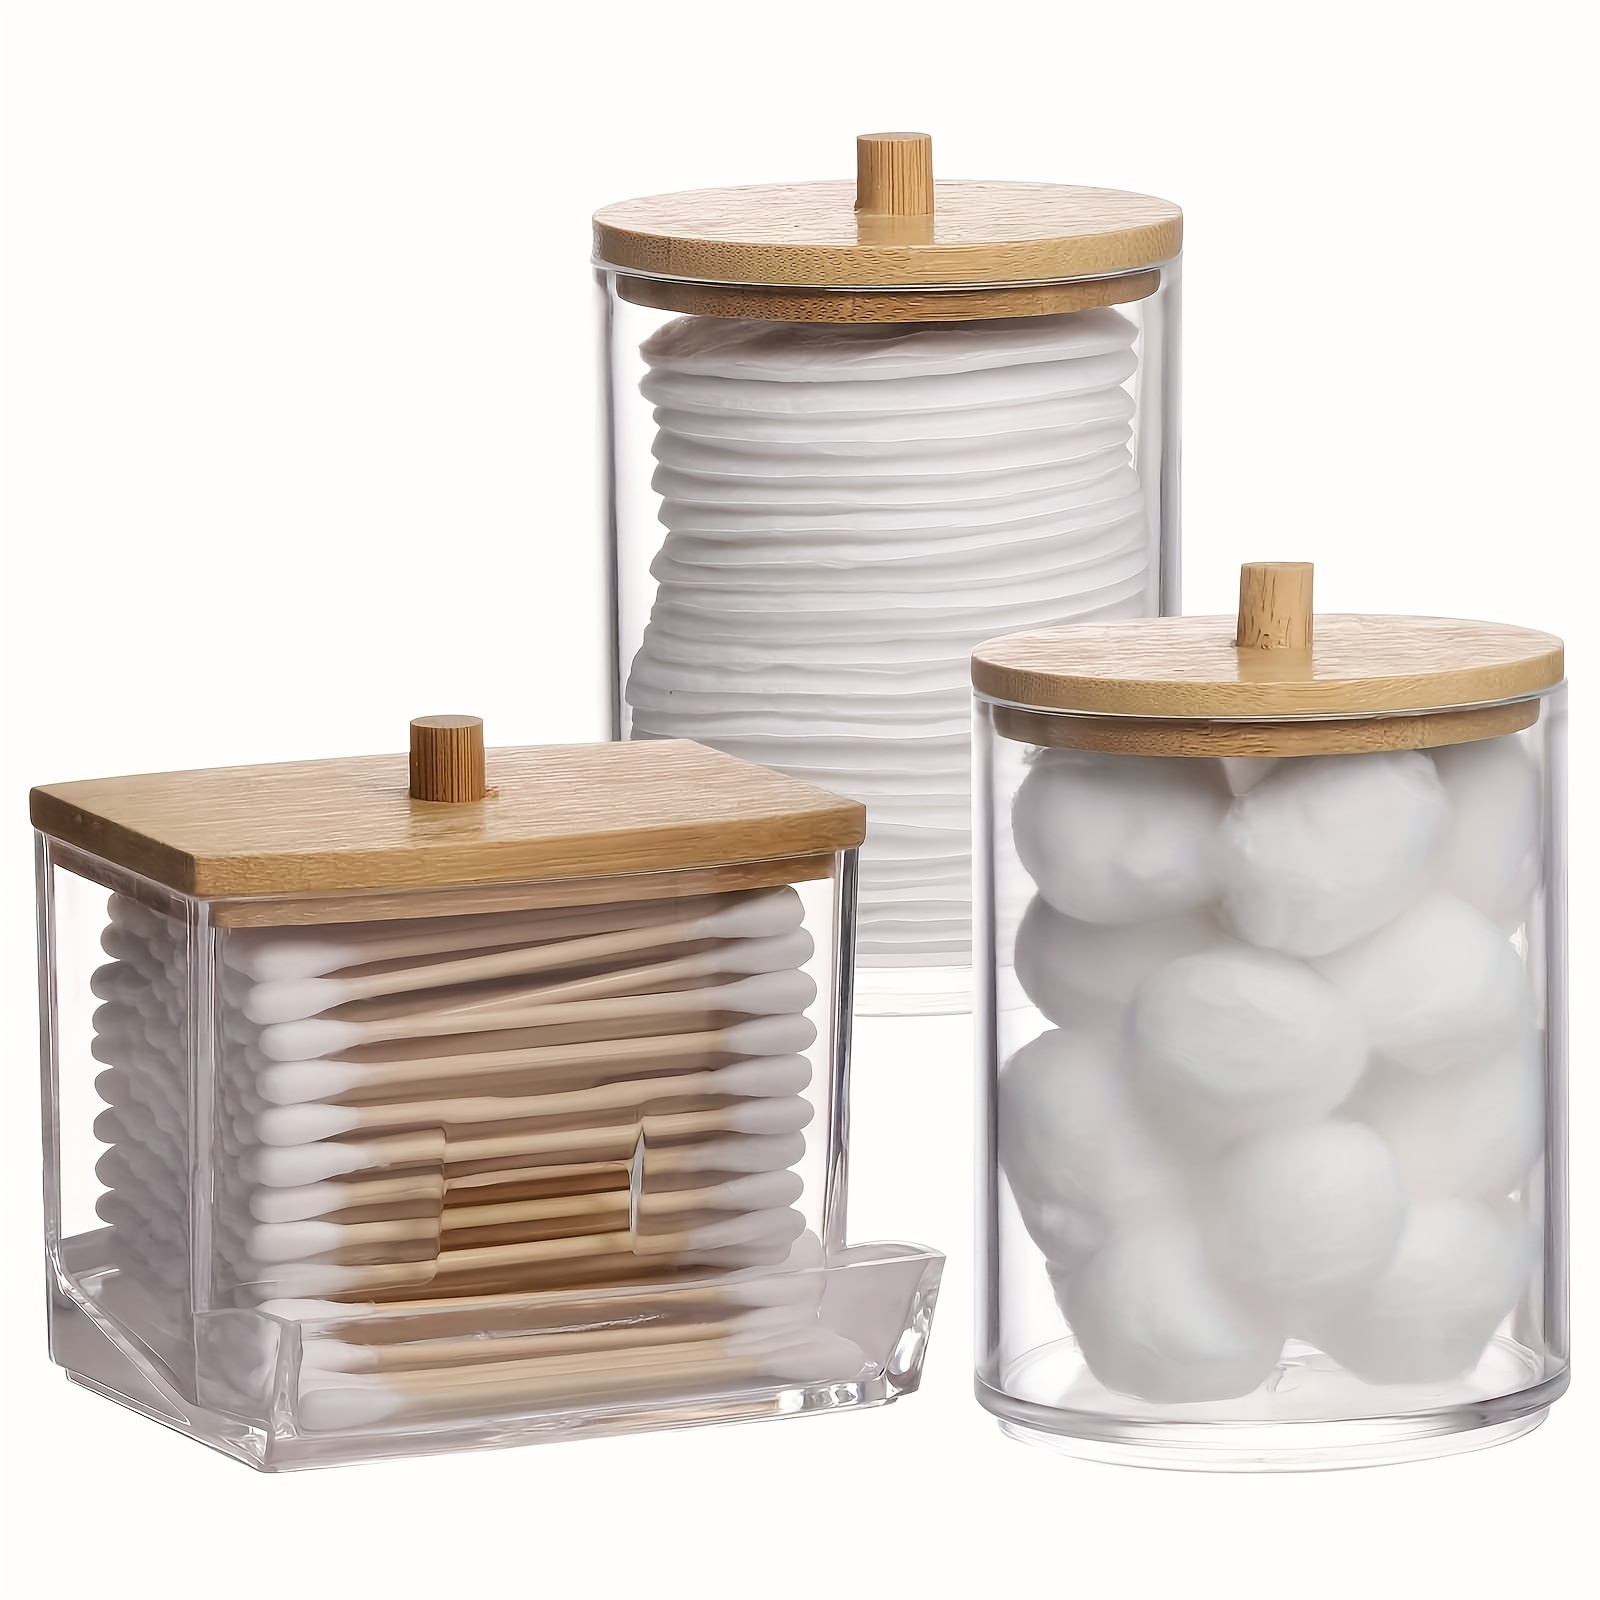 

3-piece Acrylic Qtip Holder Set With Wooden Lids For Cotton Balls, Swabs, Pads - Flip Top Clear Plastic Organizers For Bathroom, Vanity Storage - Unscented, Durable Dispenser Containers